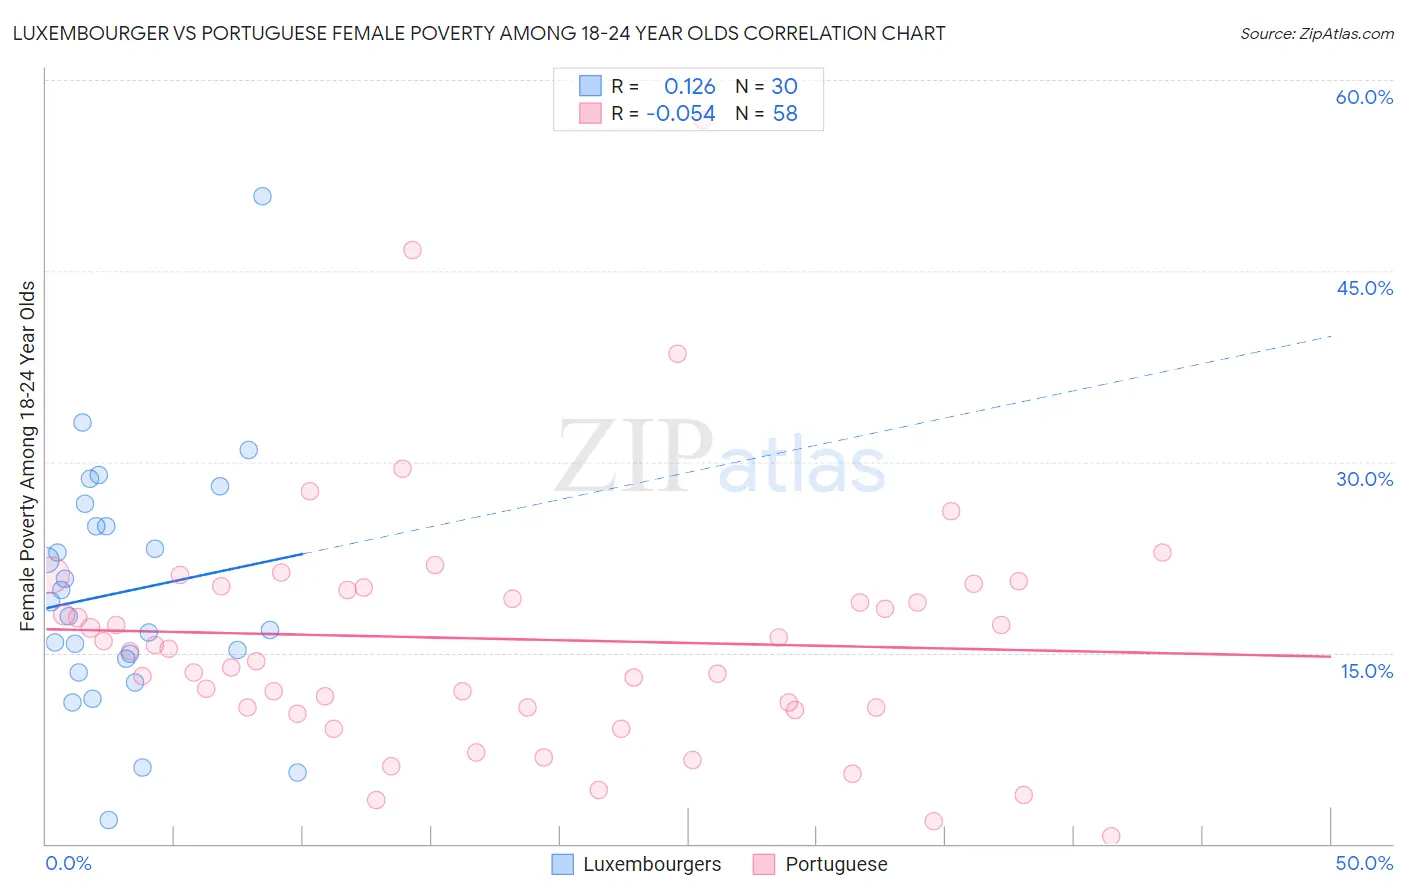 Luxembourger vs Portuguese Female Poverty Among 18-24 Year Olds